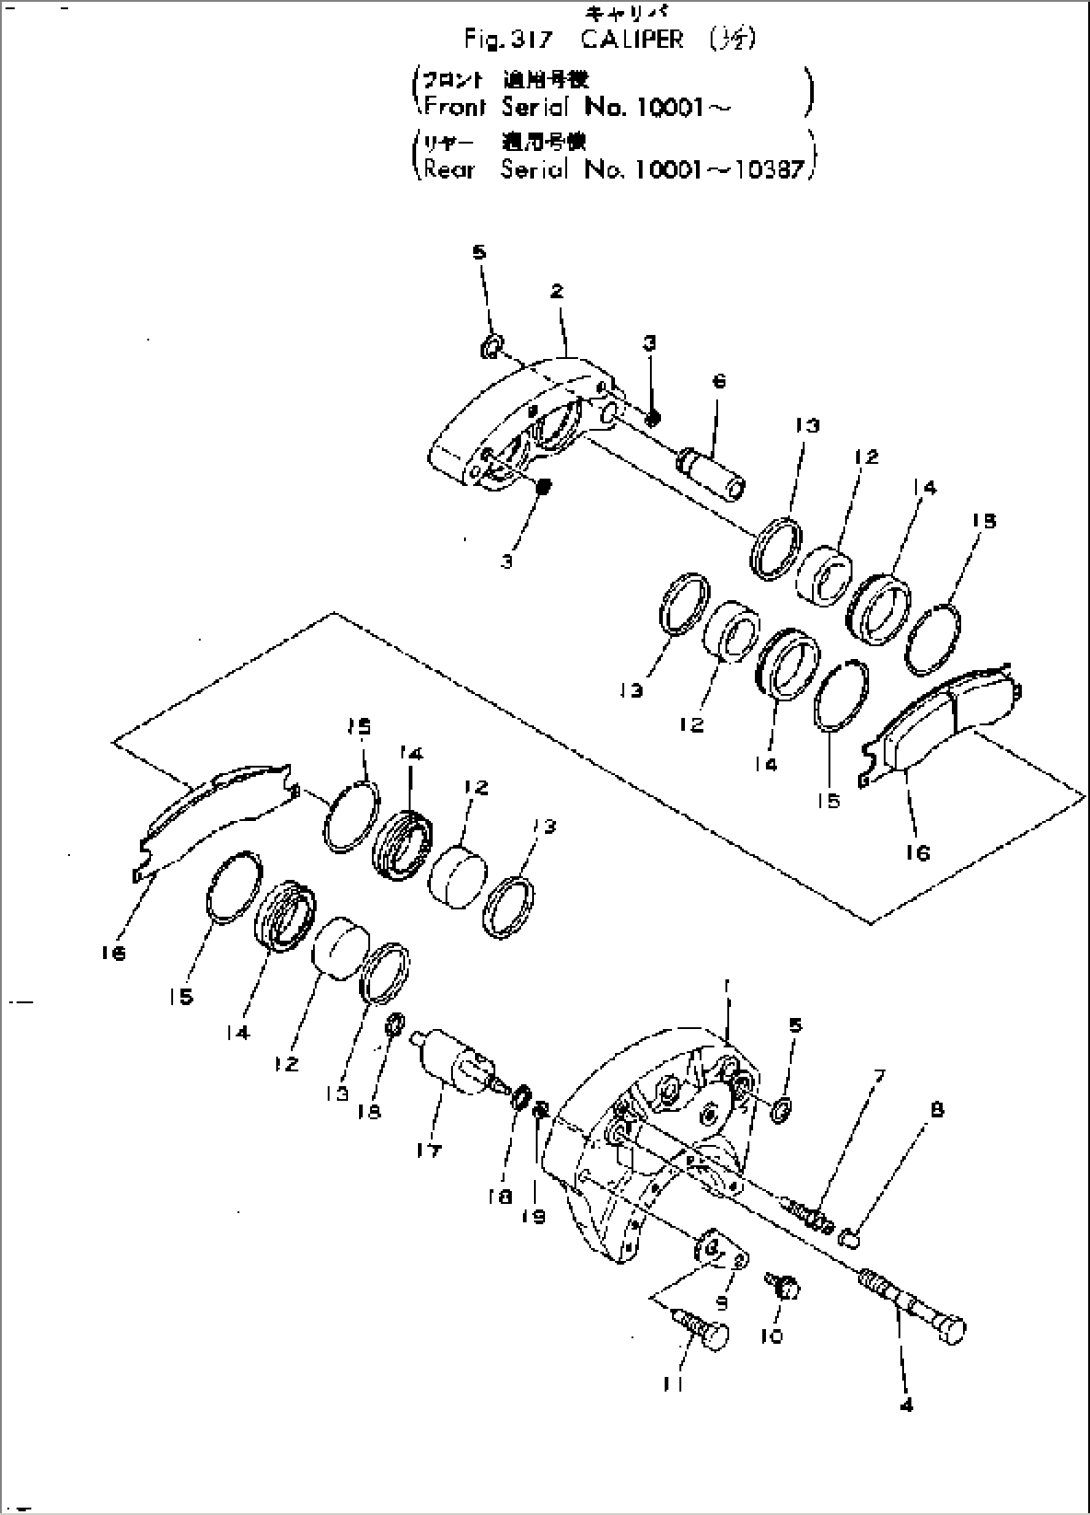 CALIPER (1/2) (FRONT AND REAR)(#10001-)